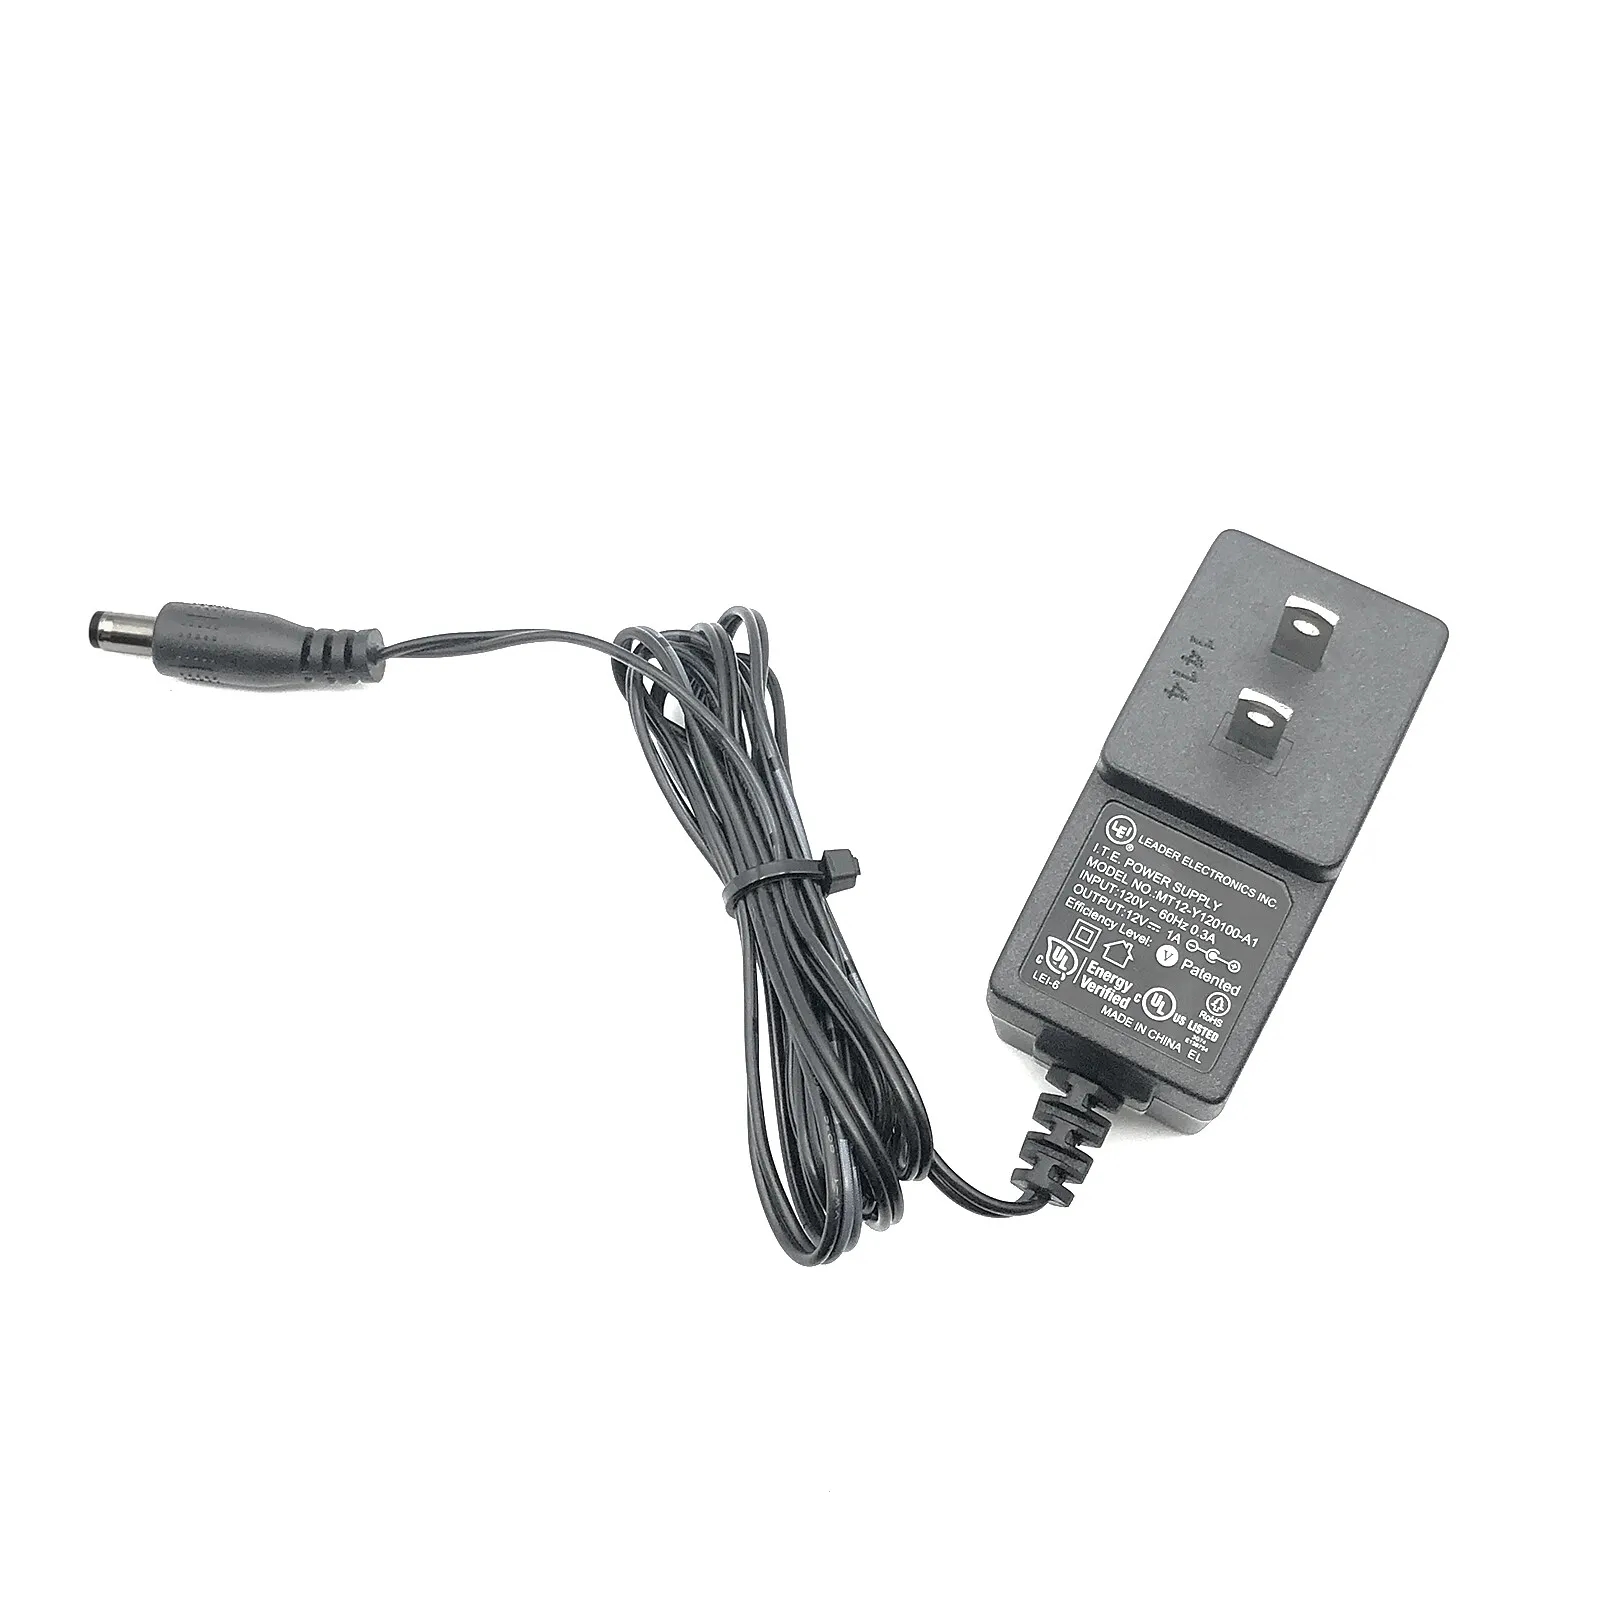 *Brand NEW*Genuine LEI 12V 1A AC Adapter MT12-Y120100-A1 for Netgear ProSafe Switch GS105 GS105NA GS105v5 GS10